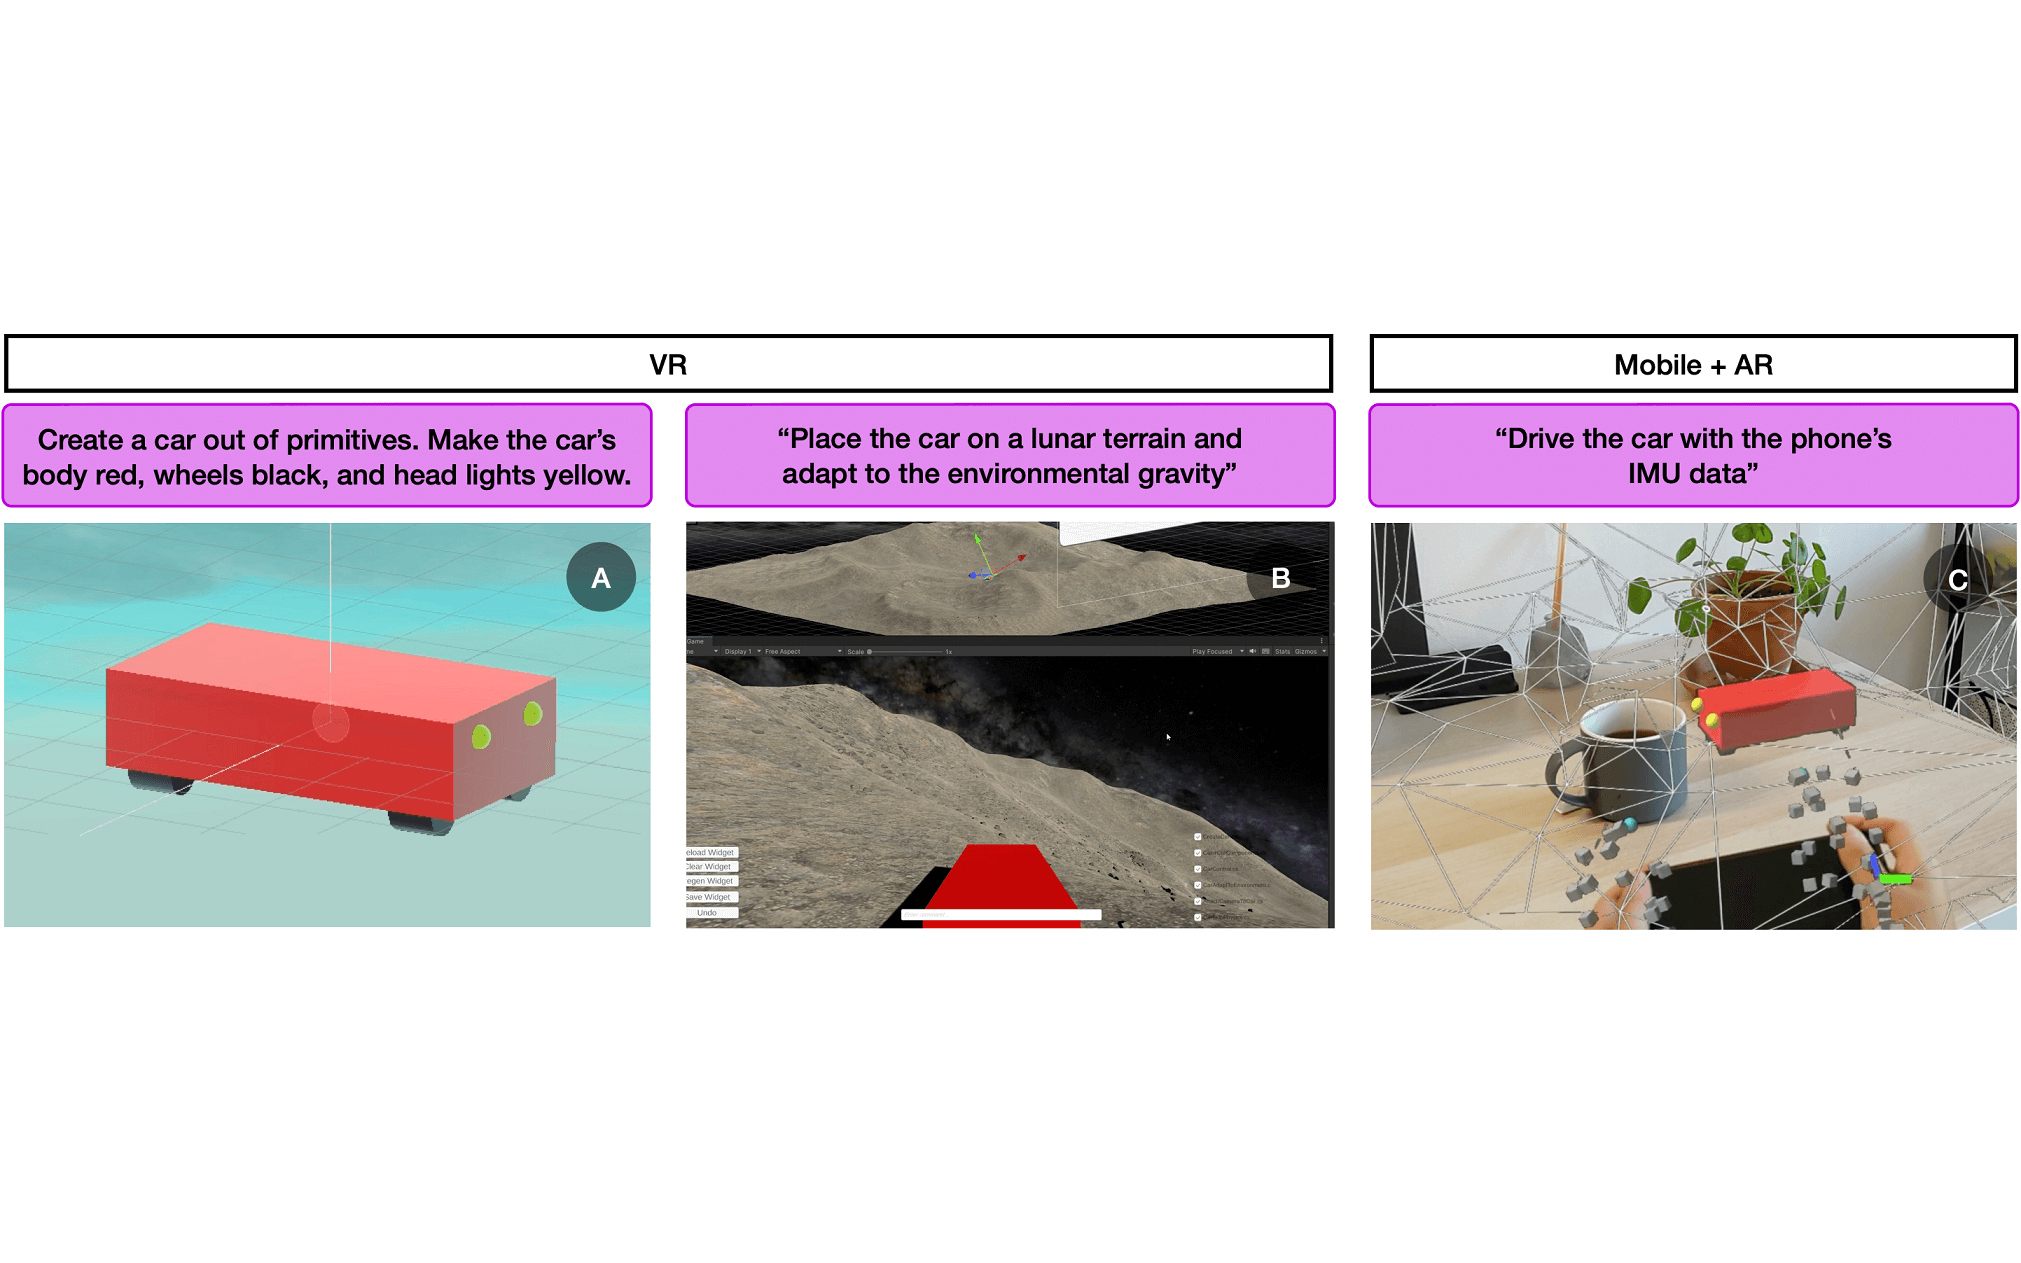 This figure showcases the cross-platform and cross-scene transferability of LLMR. It displays a car created by LLMR in three different scenarios: in a basic Unity scene, in a scene with moon-like gravity and terrain, and in a real-world scene controlled by a user's mobile phone. 